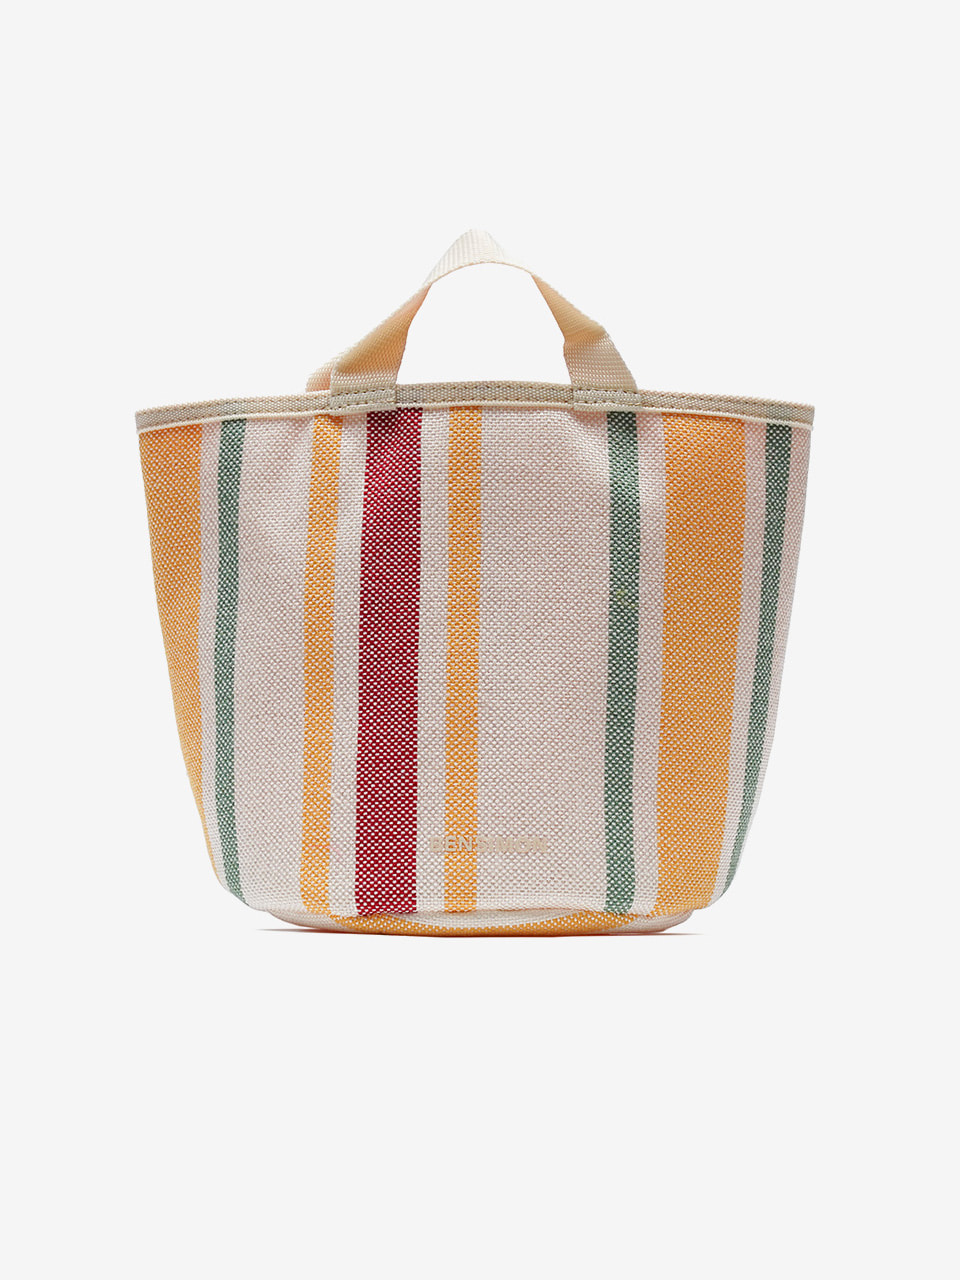 [PARIS COLLECTION] POLYESTER BUCKET STORAGE SMALL - YELLOW